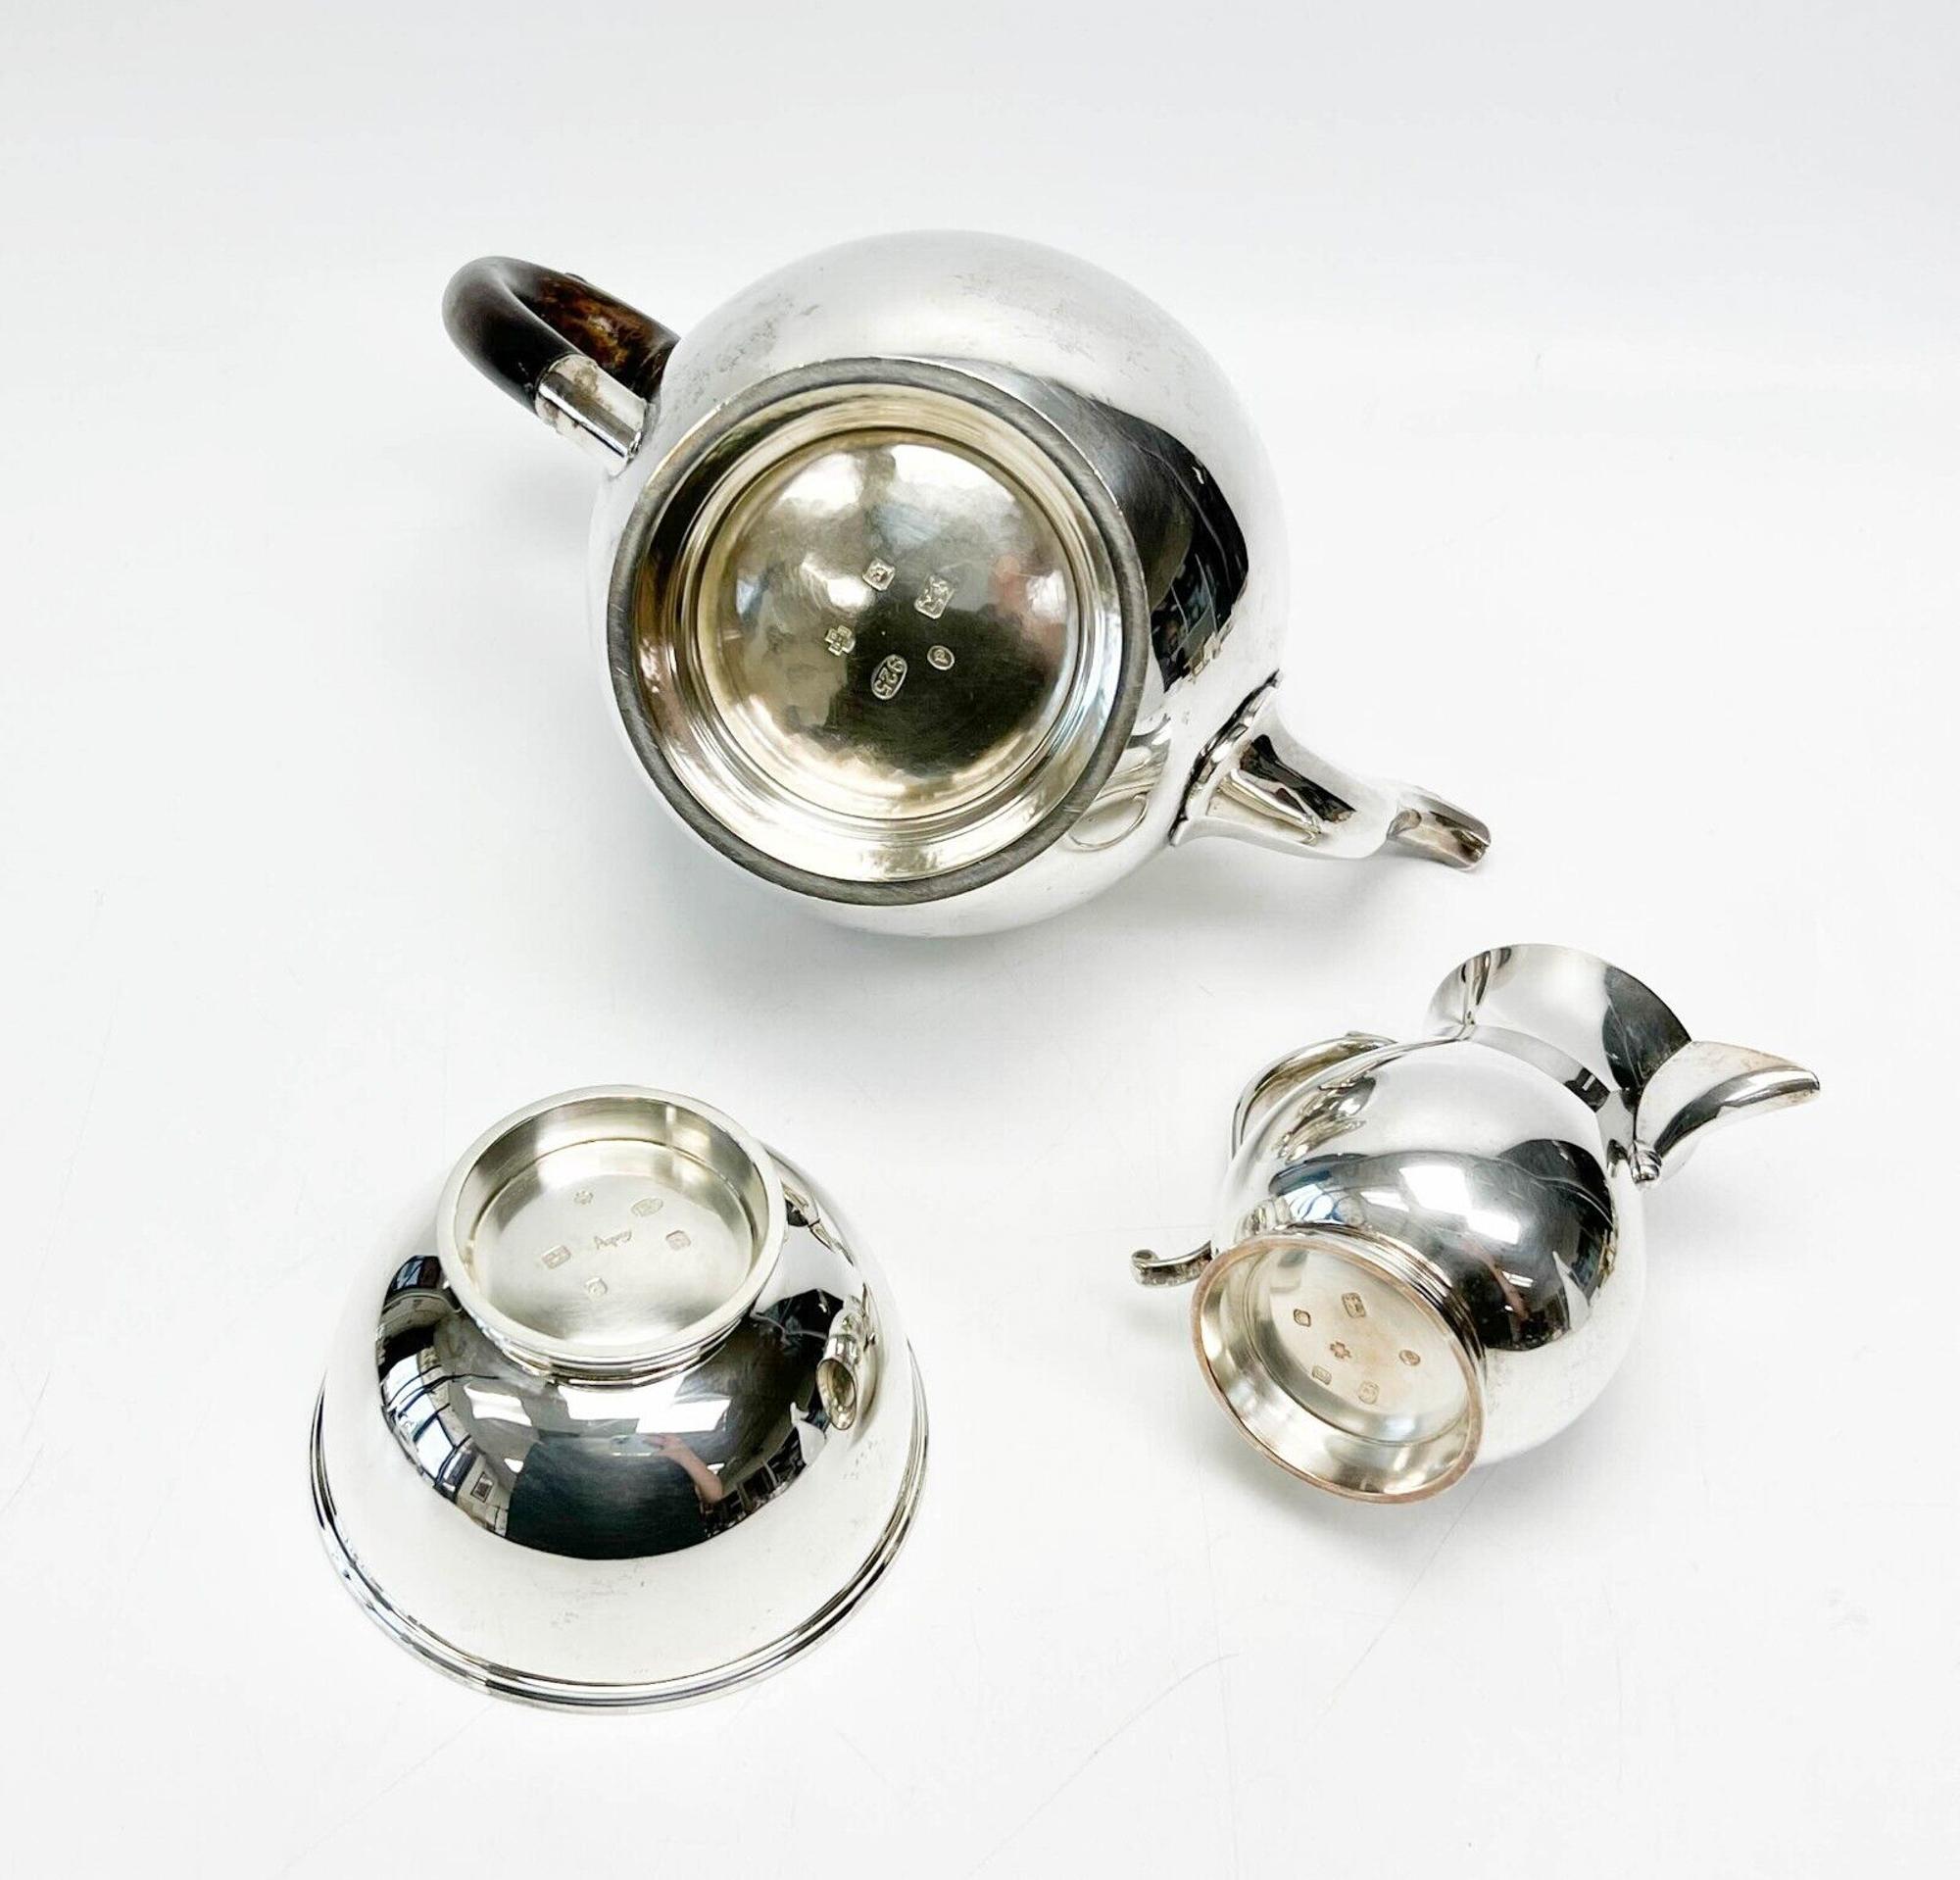 Asprey & Garrard England Sterling Silver Tea Set Teapot with Wood Handle In Good Condition For Sale In Gardena, CA